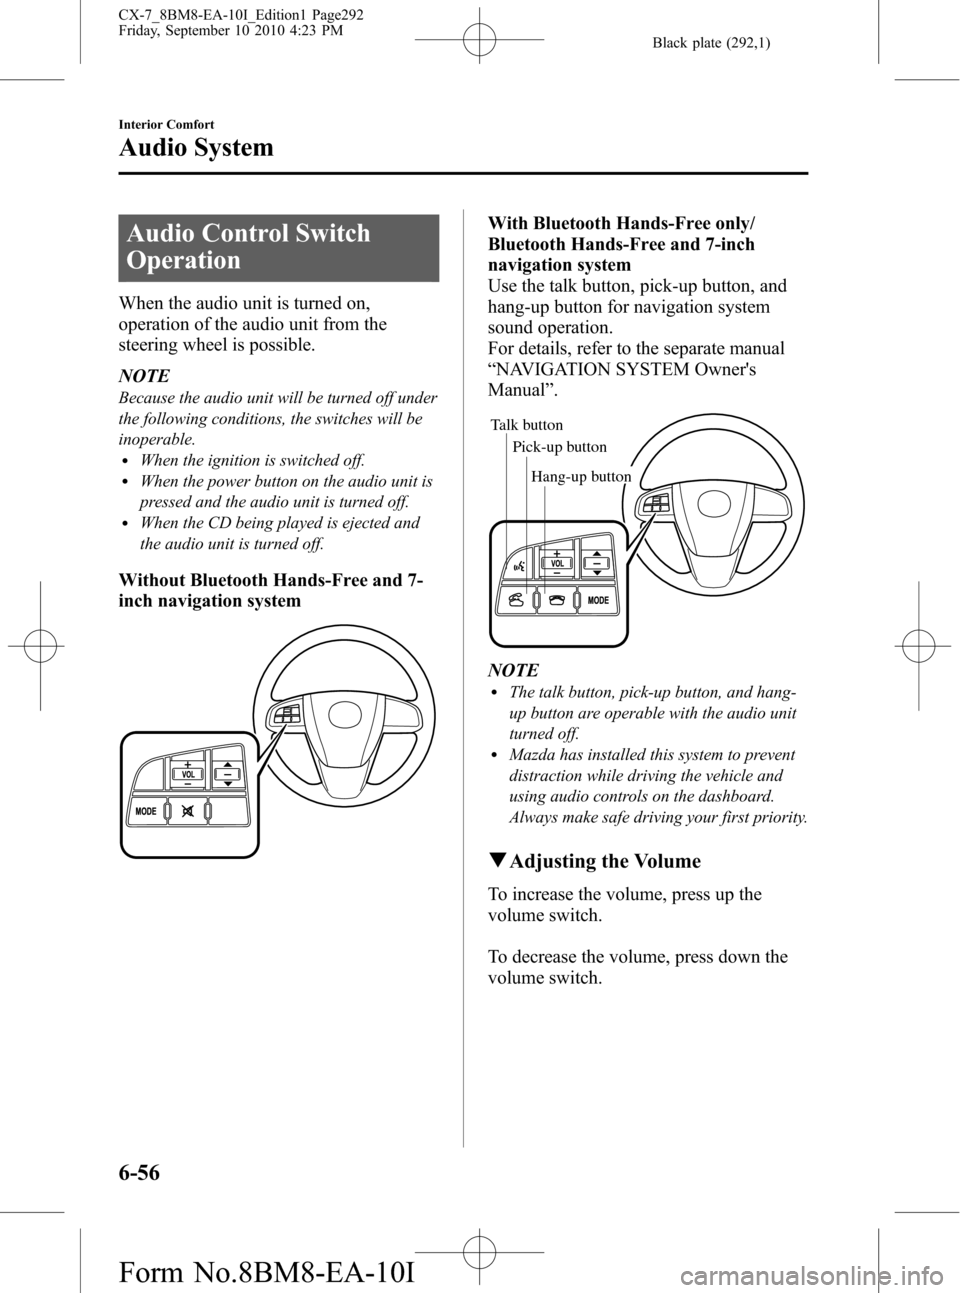 MAZDA MODEL CX-7 2011  Owners Manual (in English) Black plate (292,1)
Audio Control Switch
Operation
When the audio unit is turned on,
operation of the audio unit from the
steering wheel is possible.
NOTE
Because the audio unit will be turned off und